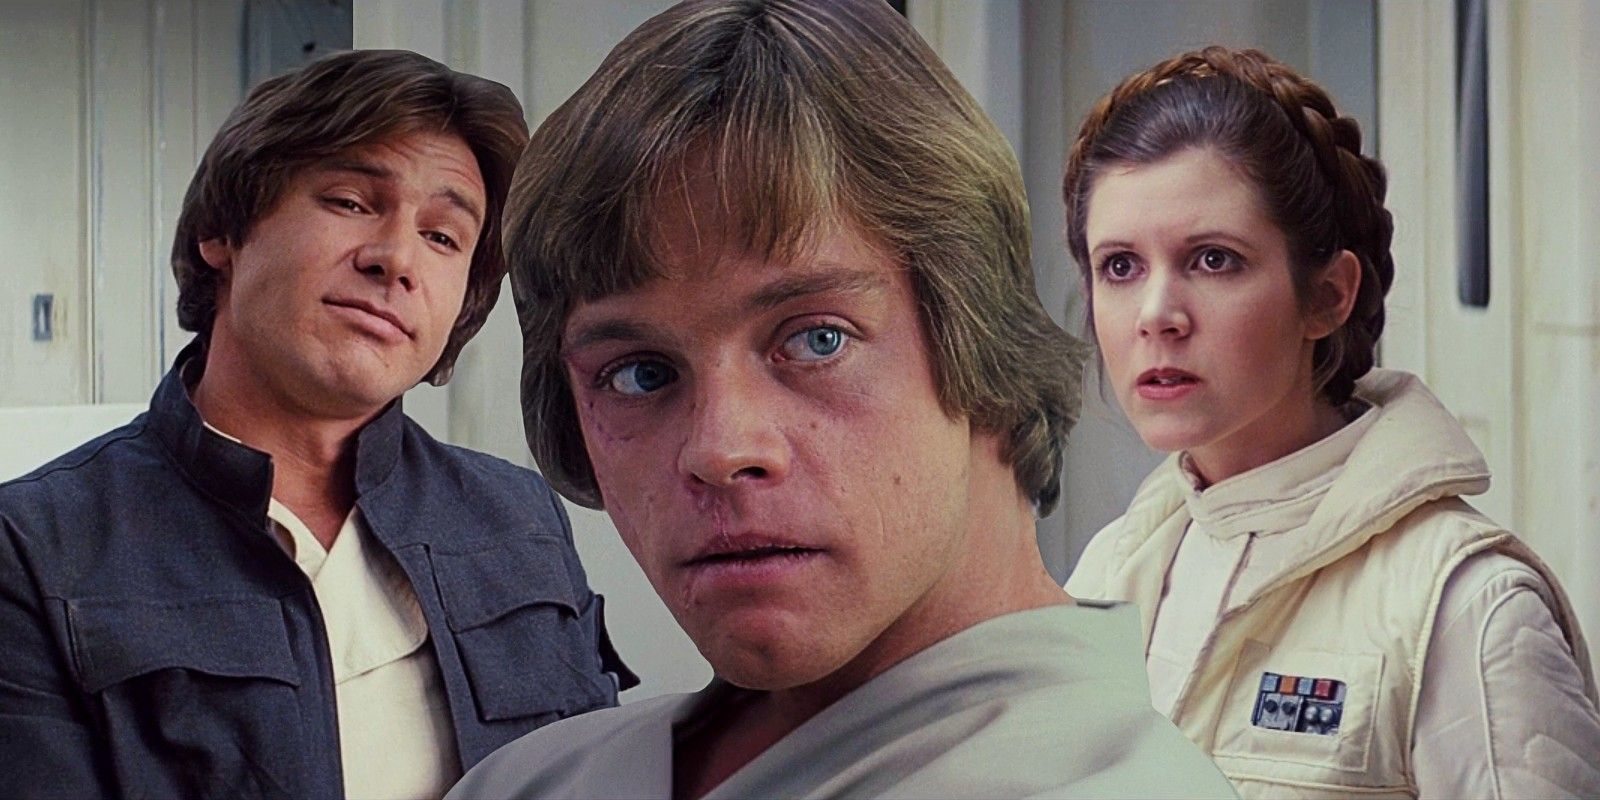 Harrison Ford as Han Solo, Mark Hamill as Luke Skywalker and Carrie Fisher as Leia Organa in Star Wars Episode V;